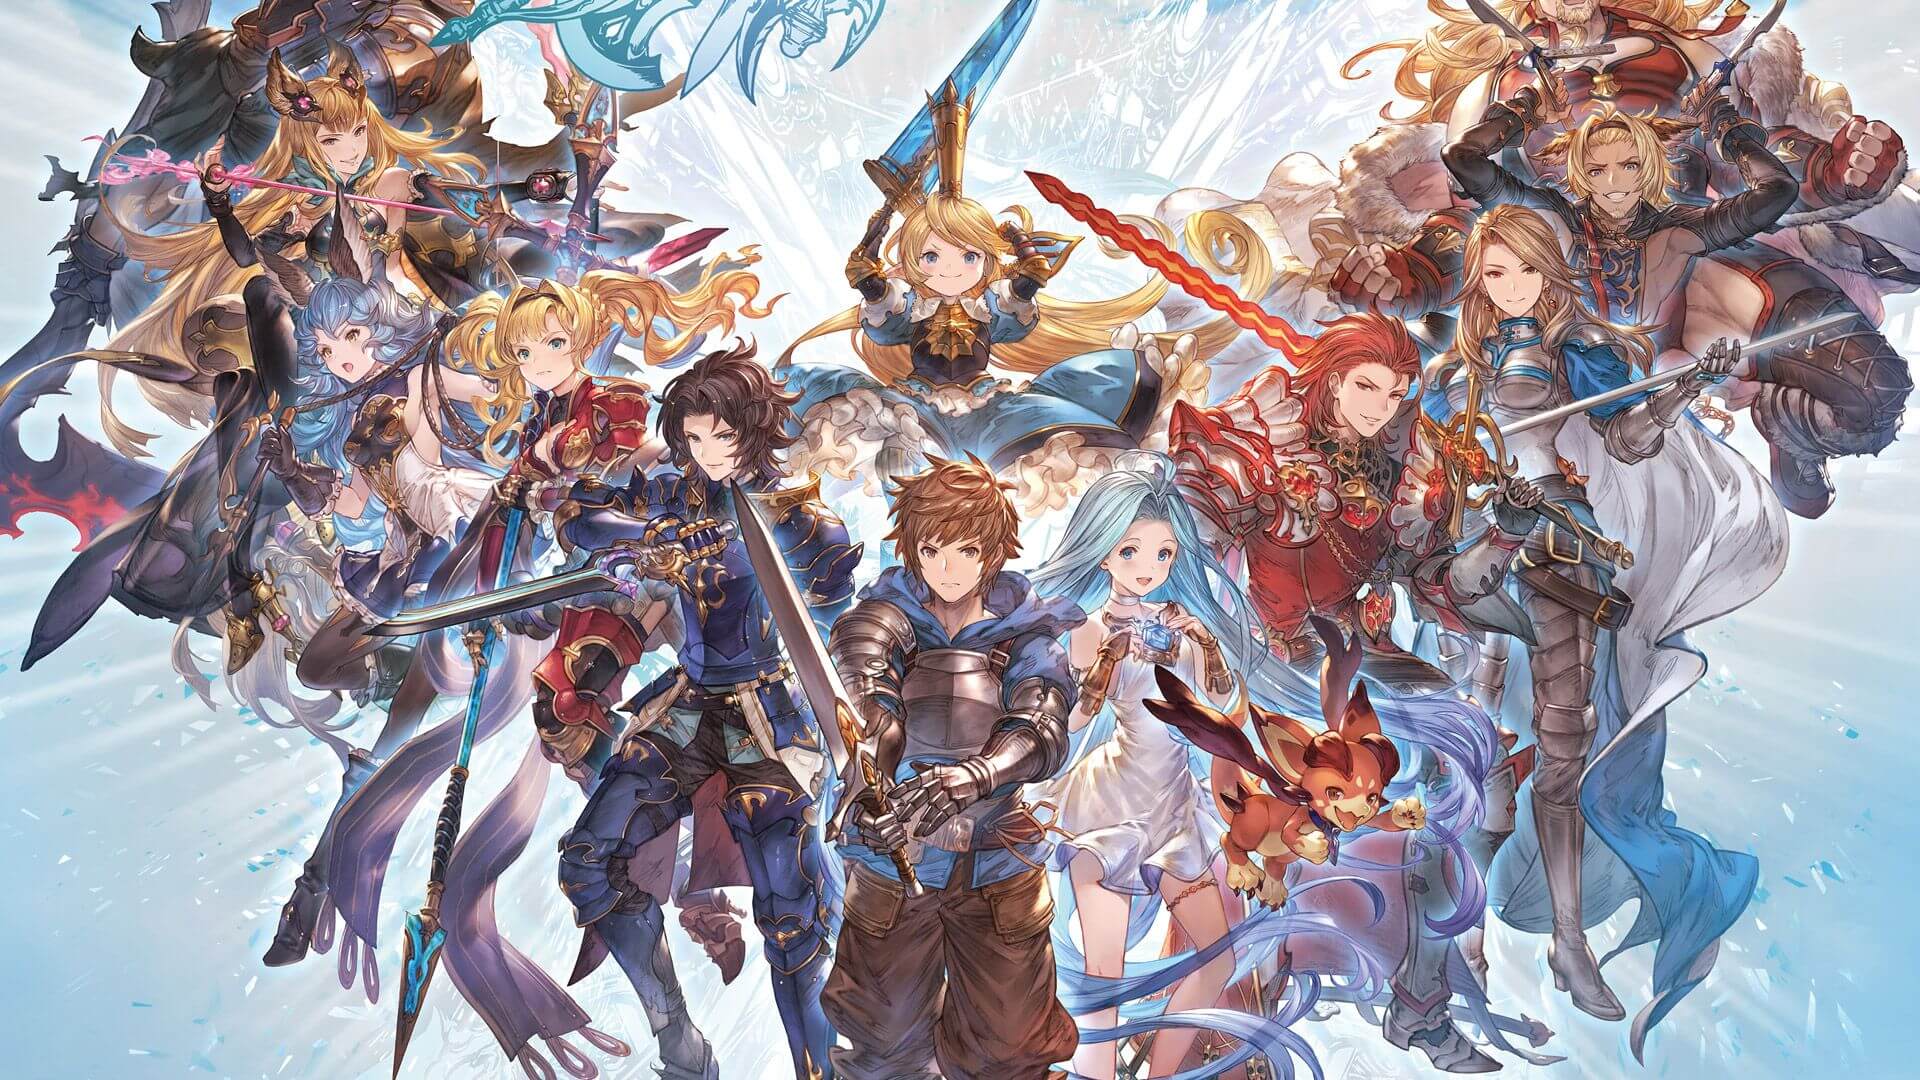 Here is Granblue Fantasy: Versus' launch character select screen